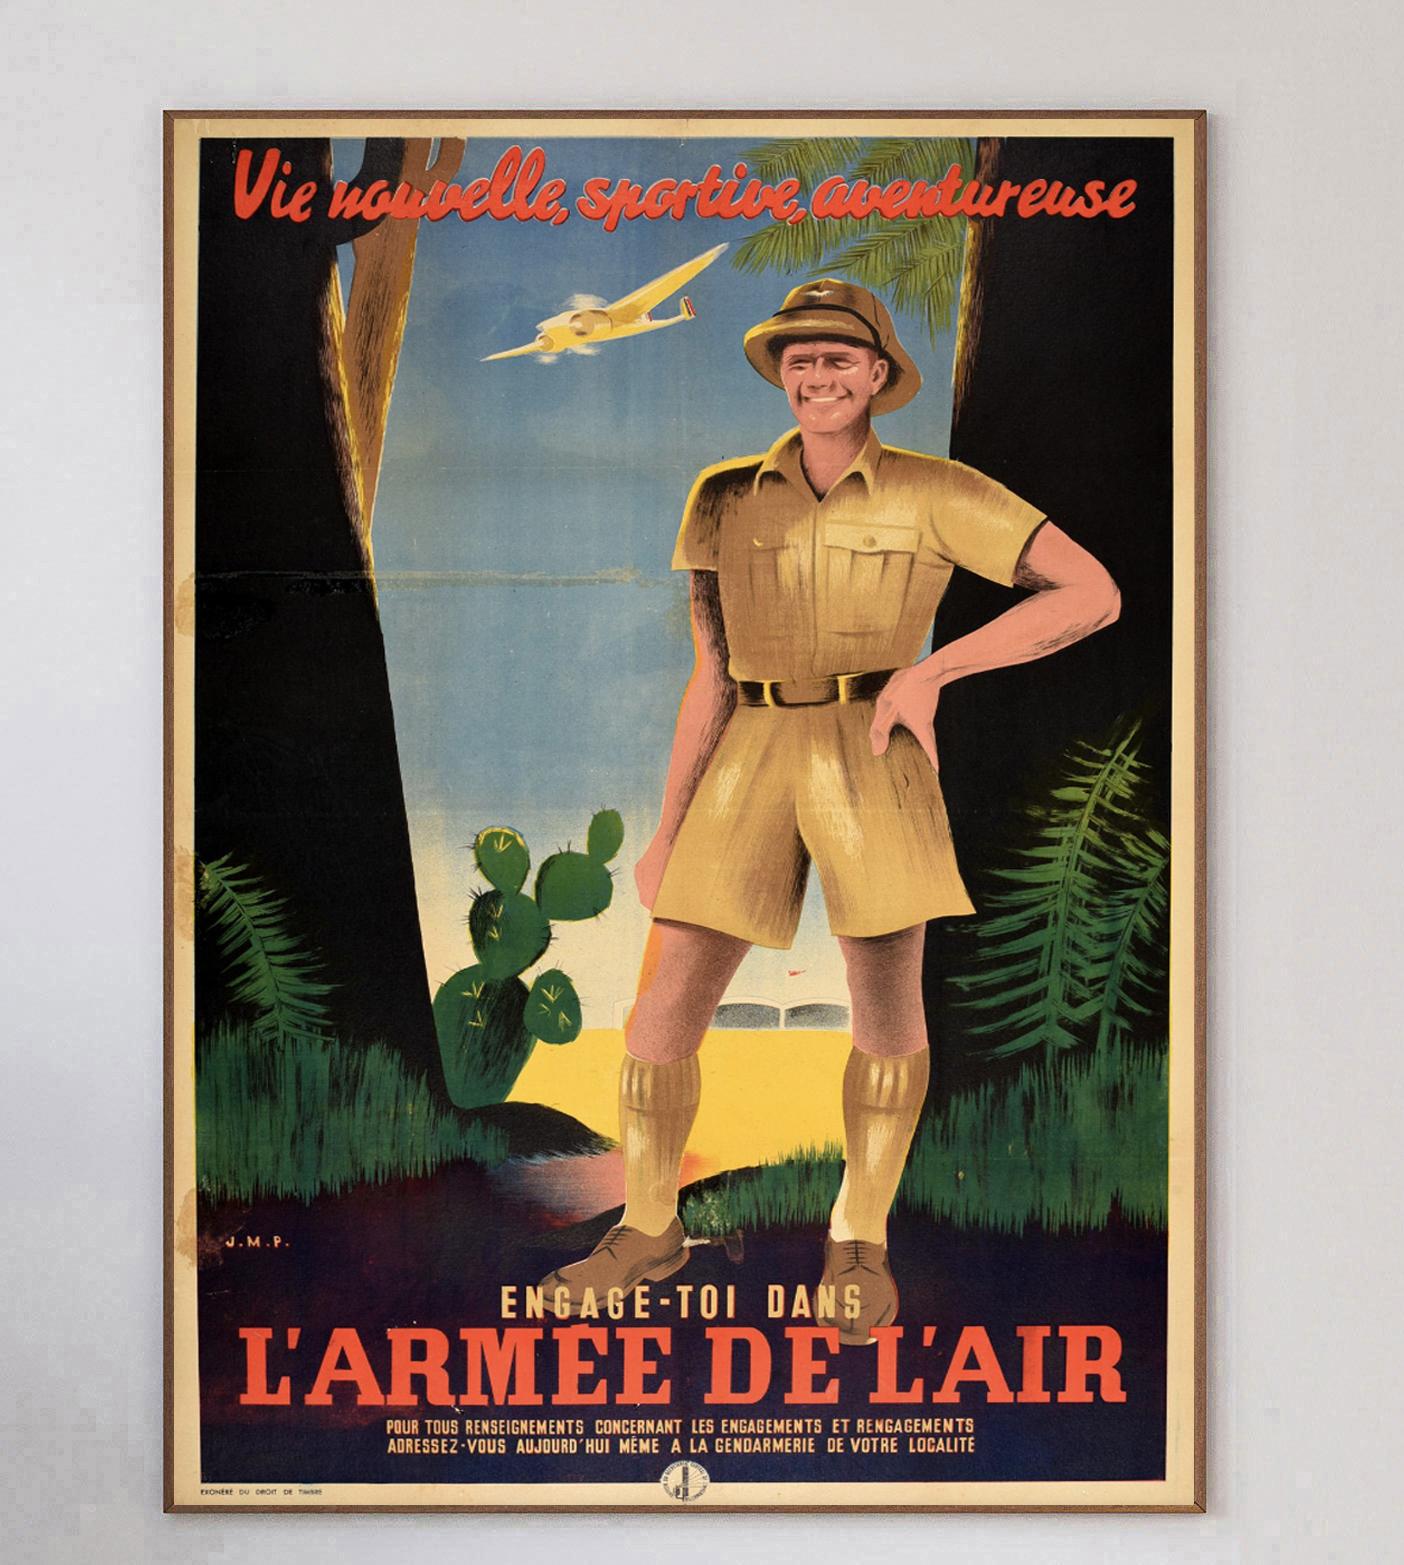 Stunning poster for the French Air Force created in 1933. Reading 